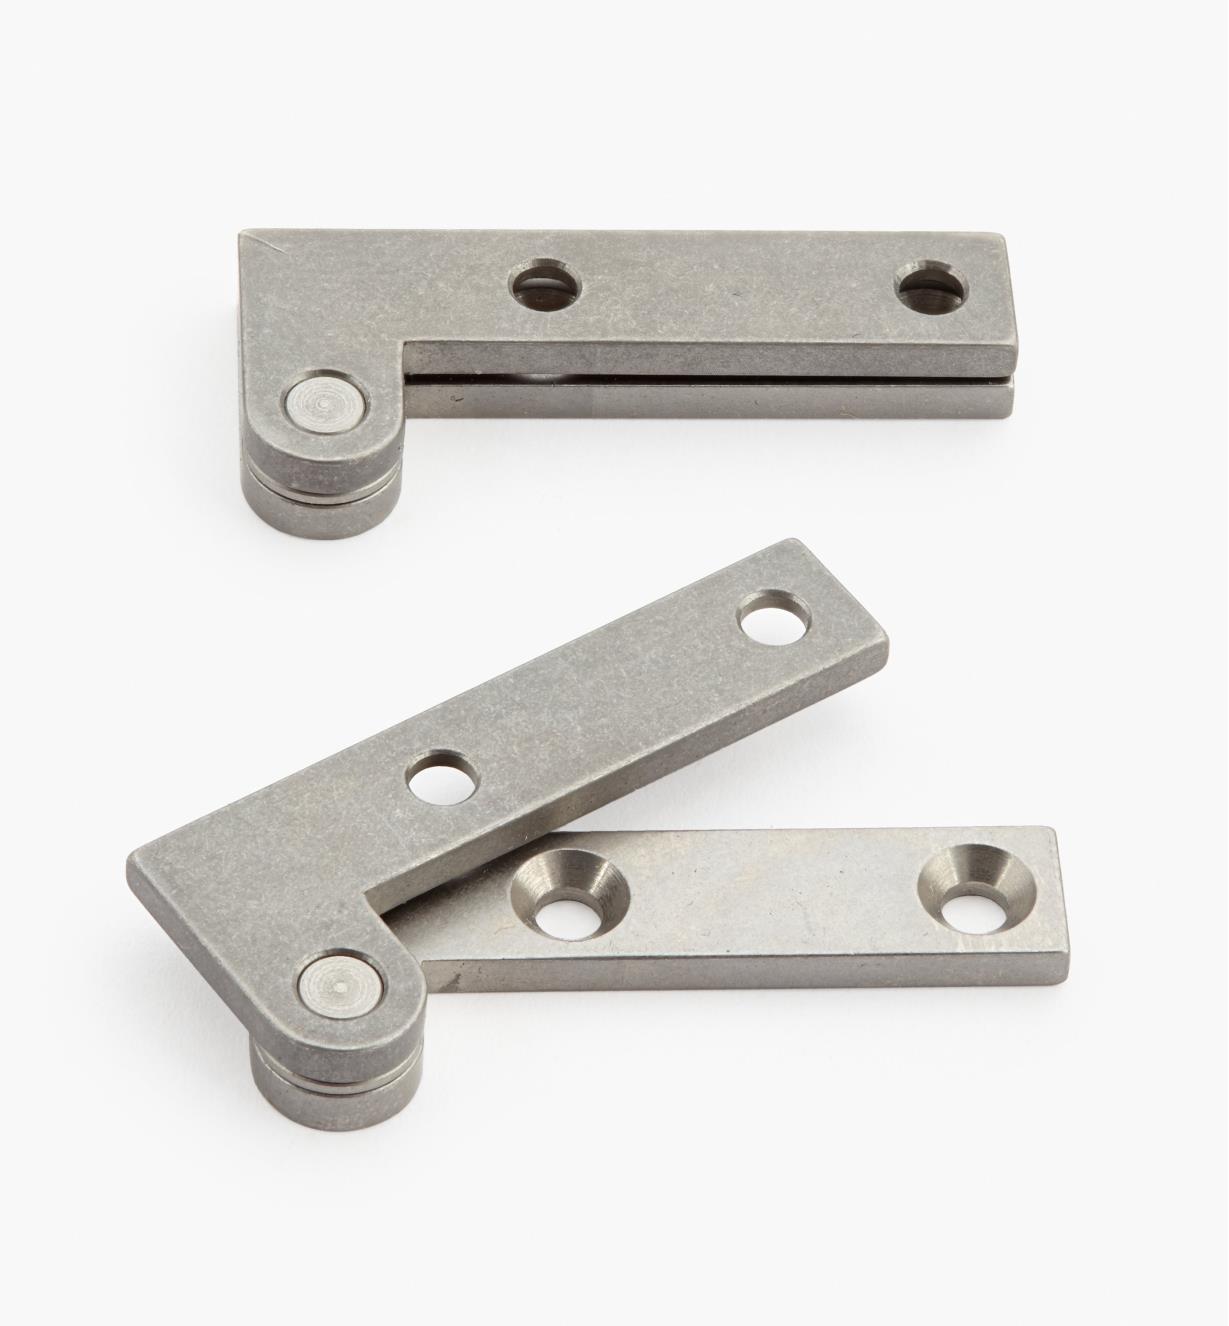 Knife Hinges For Cabinets | Cabinets Matttroy